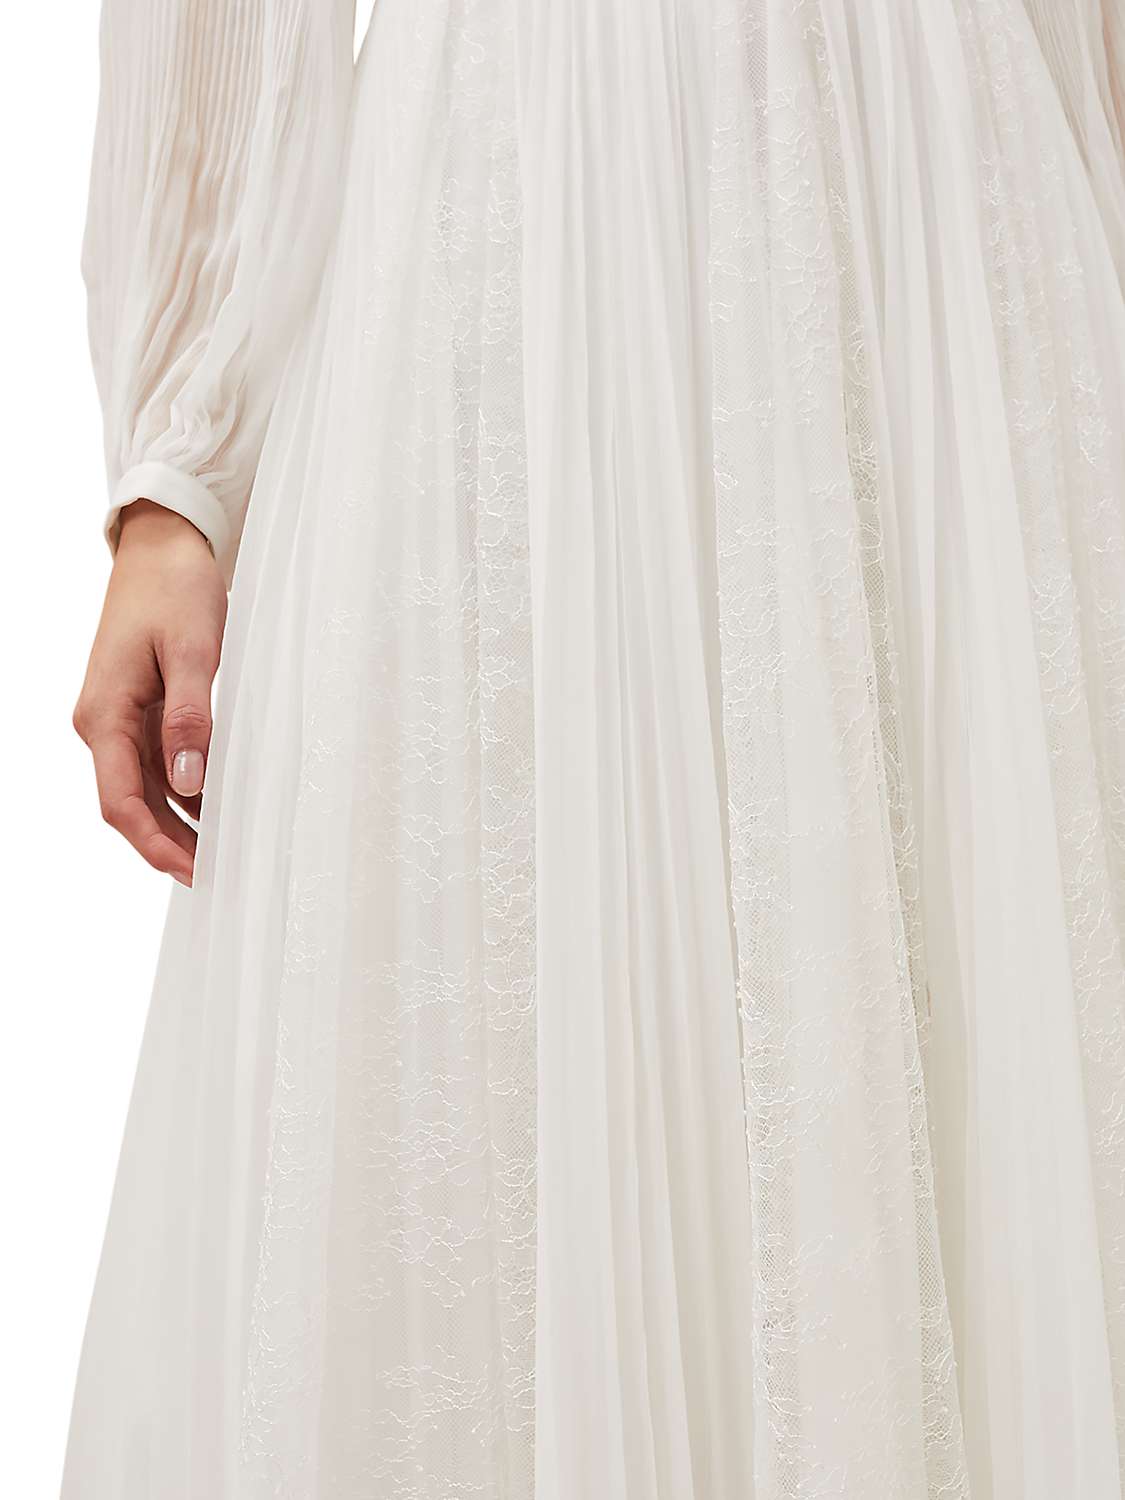 Buy Phase Eight Mariana Pleated Wedding Dress, Pearl Online at johnlewis.com